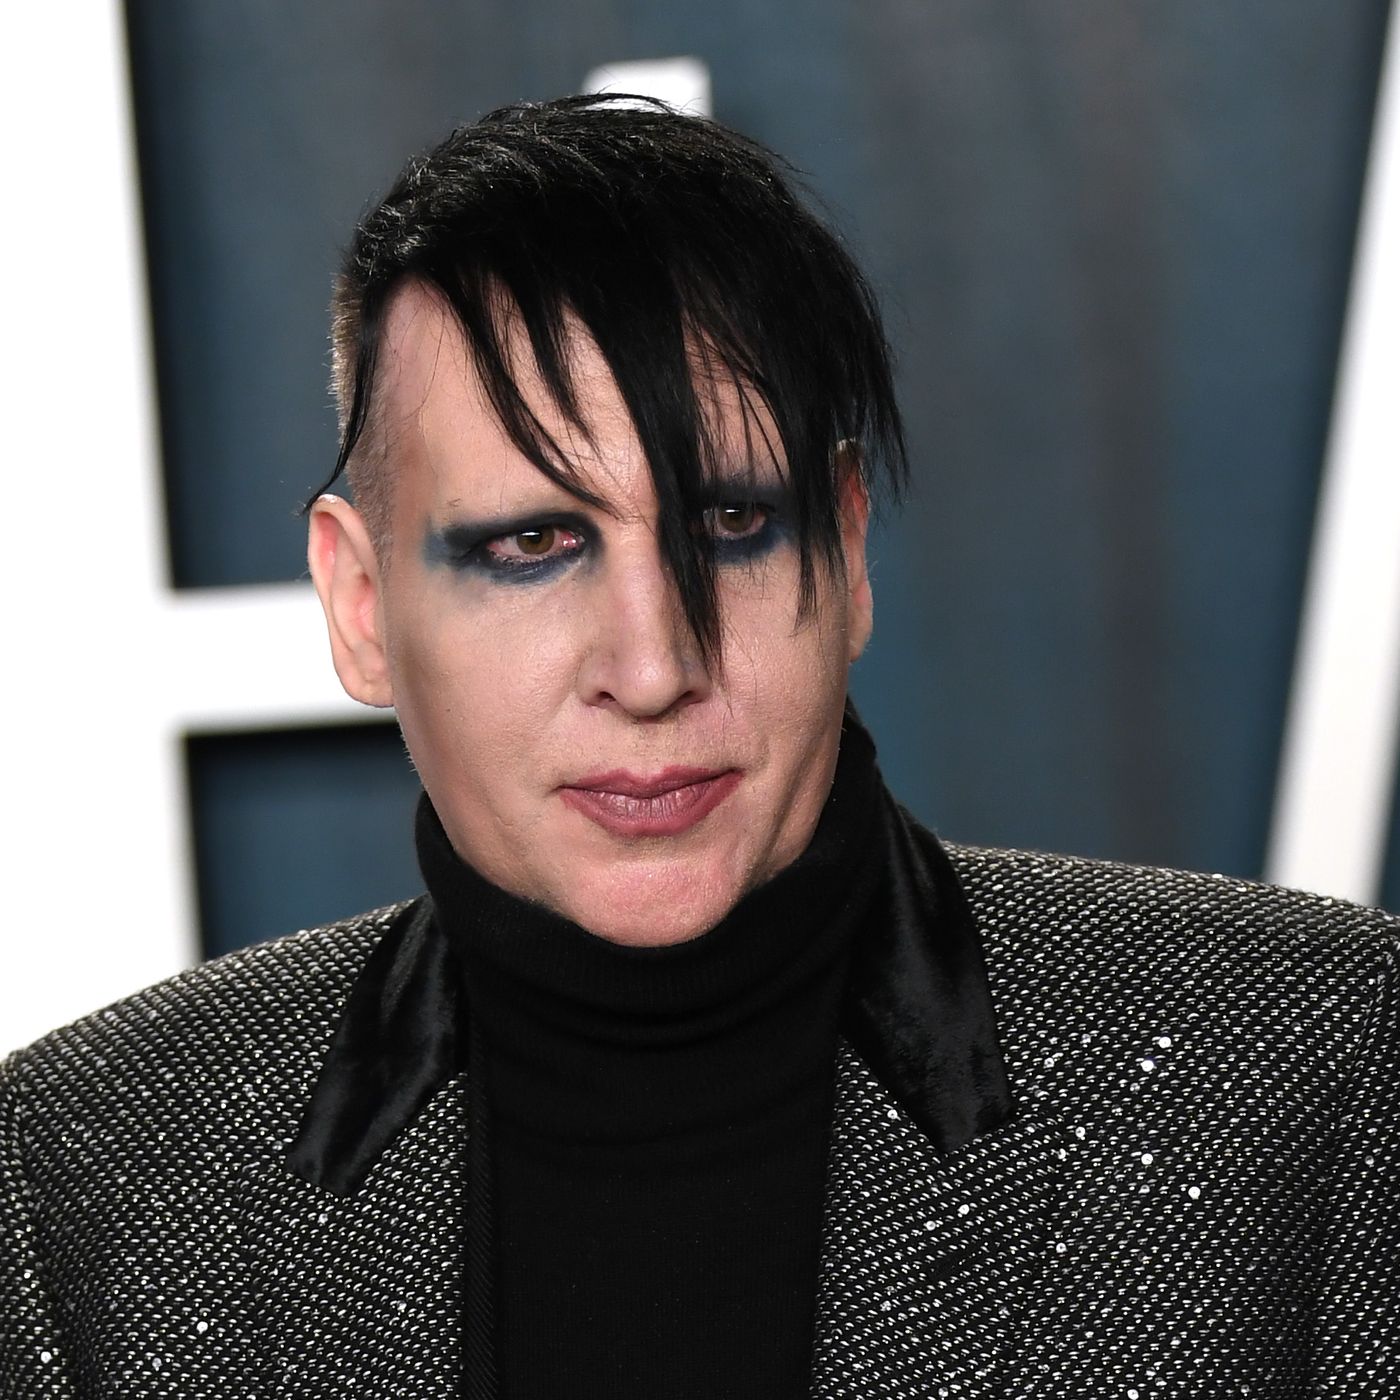 Naked Girls Forced Blowjob - What Did Marilyn Manson Do? Brian Warner's Abuse Allegations